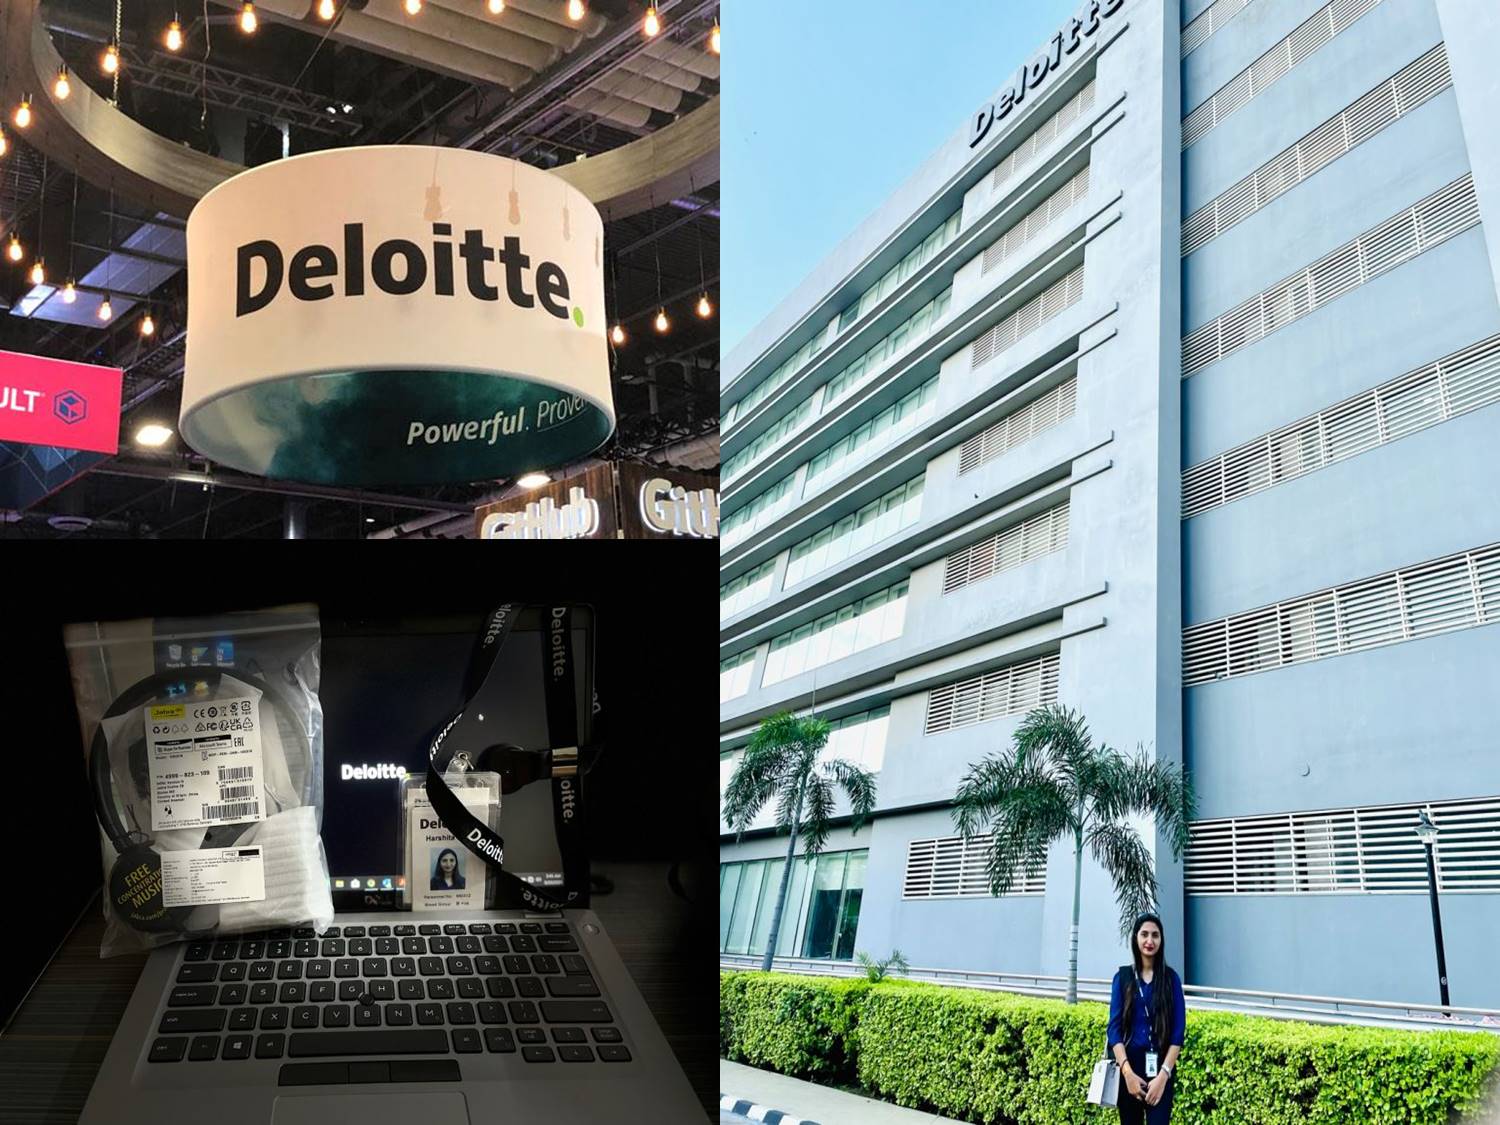 Student placed at Deloitte